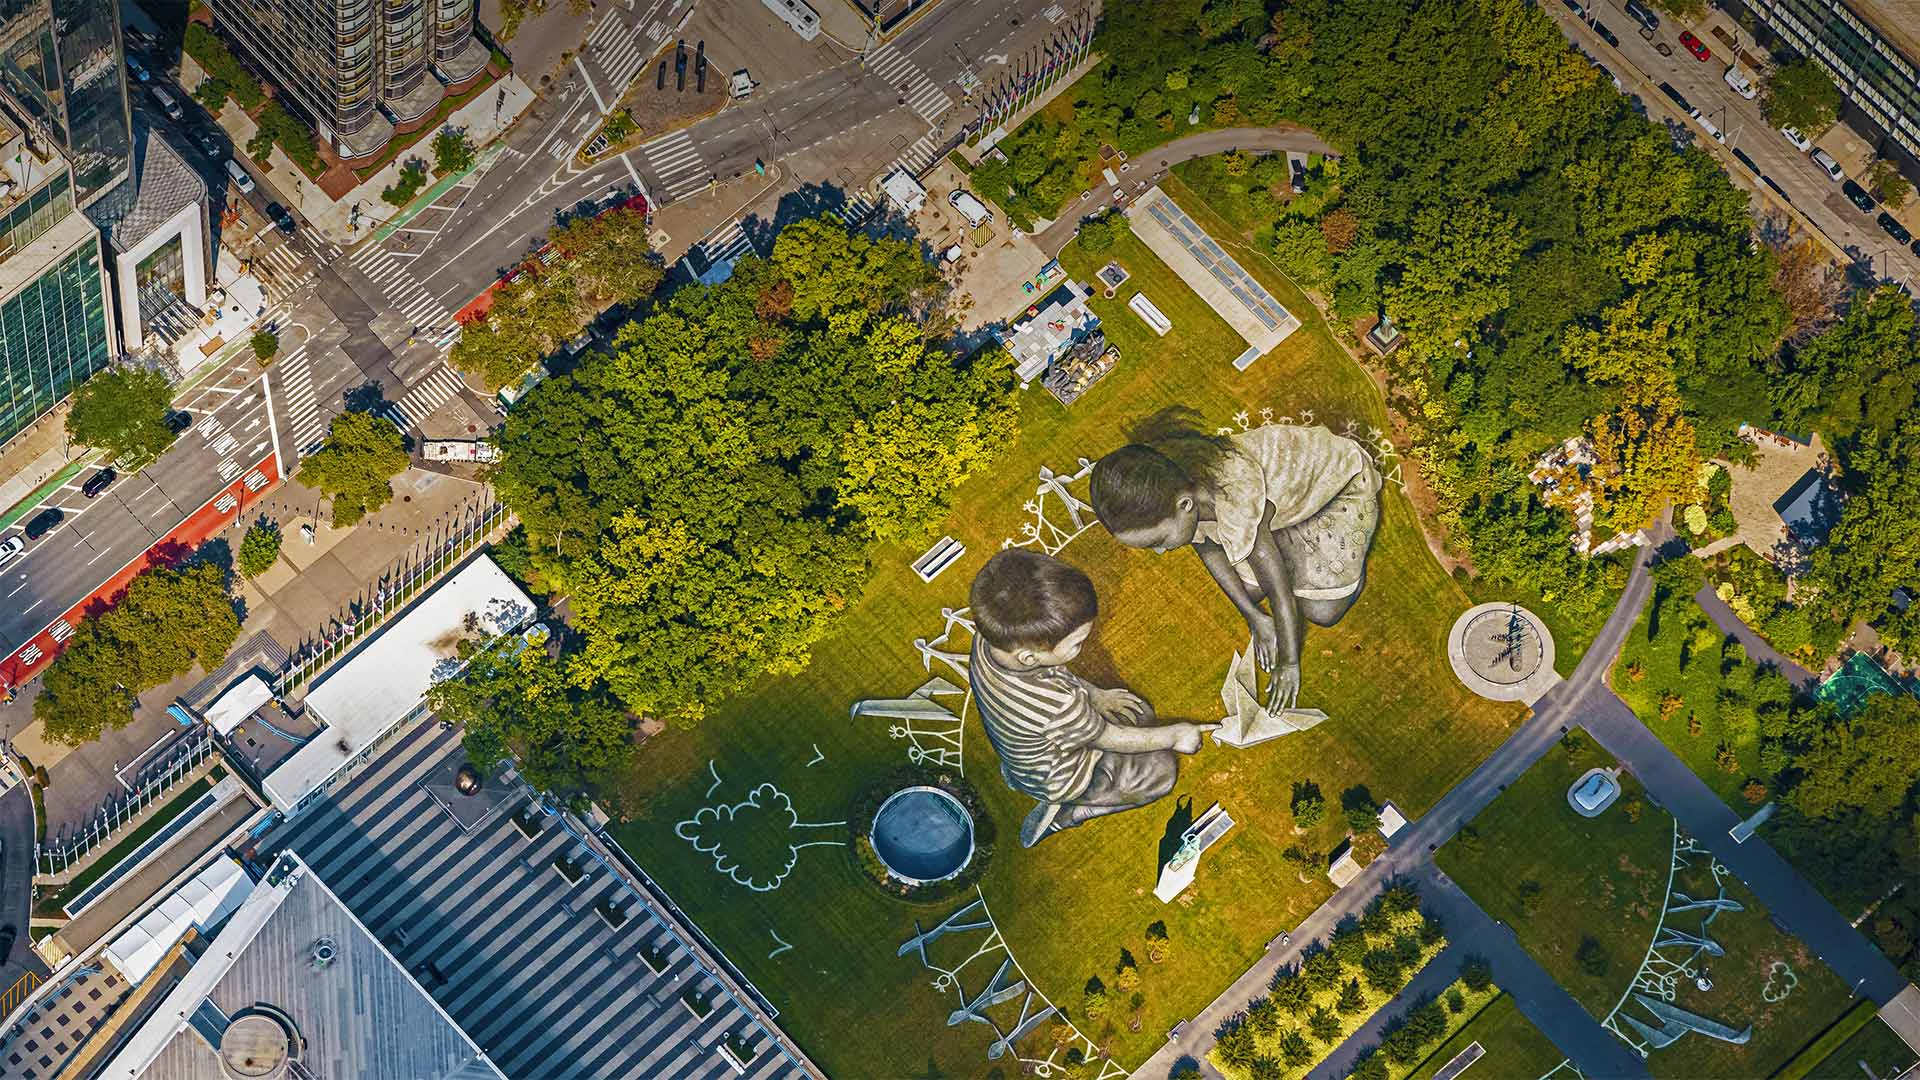 Land art painting entitled 'World in Progress II' by artist Saype at the Headquarters of the United Nations in New York City